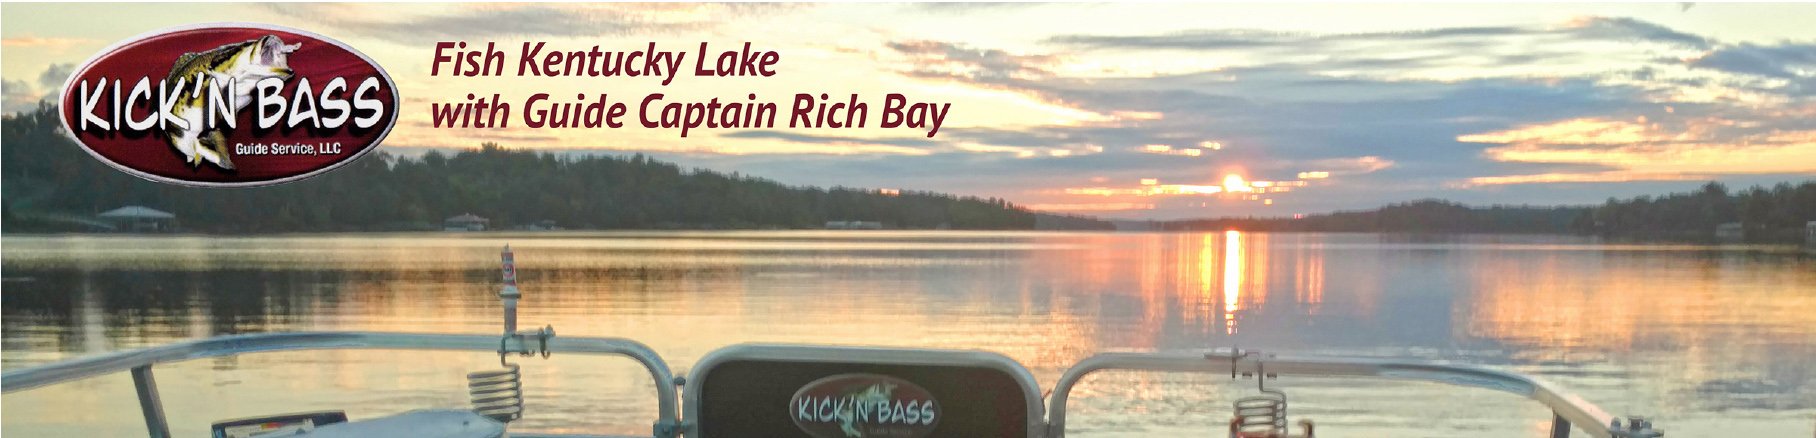 Your Kick'n Bass Fishing Report for May 17, 2018